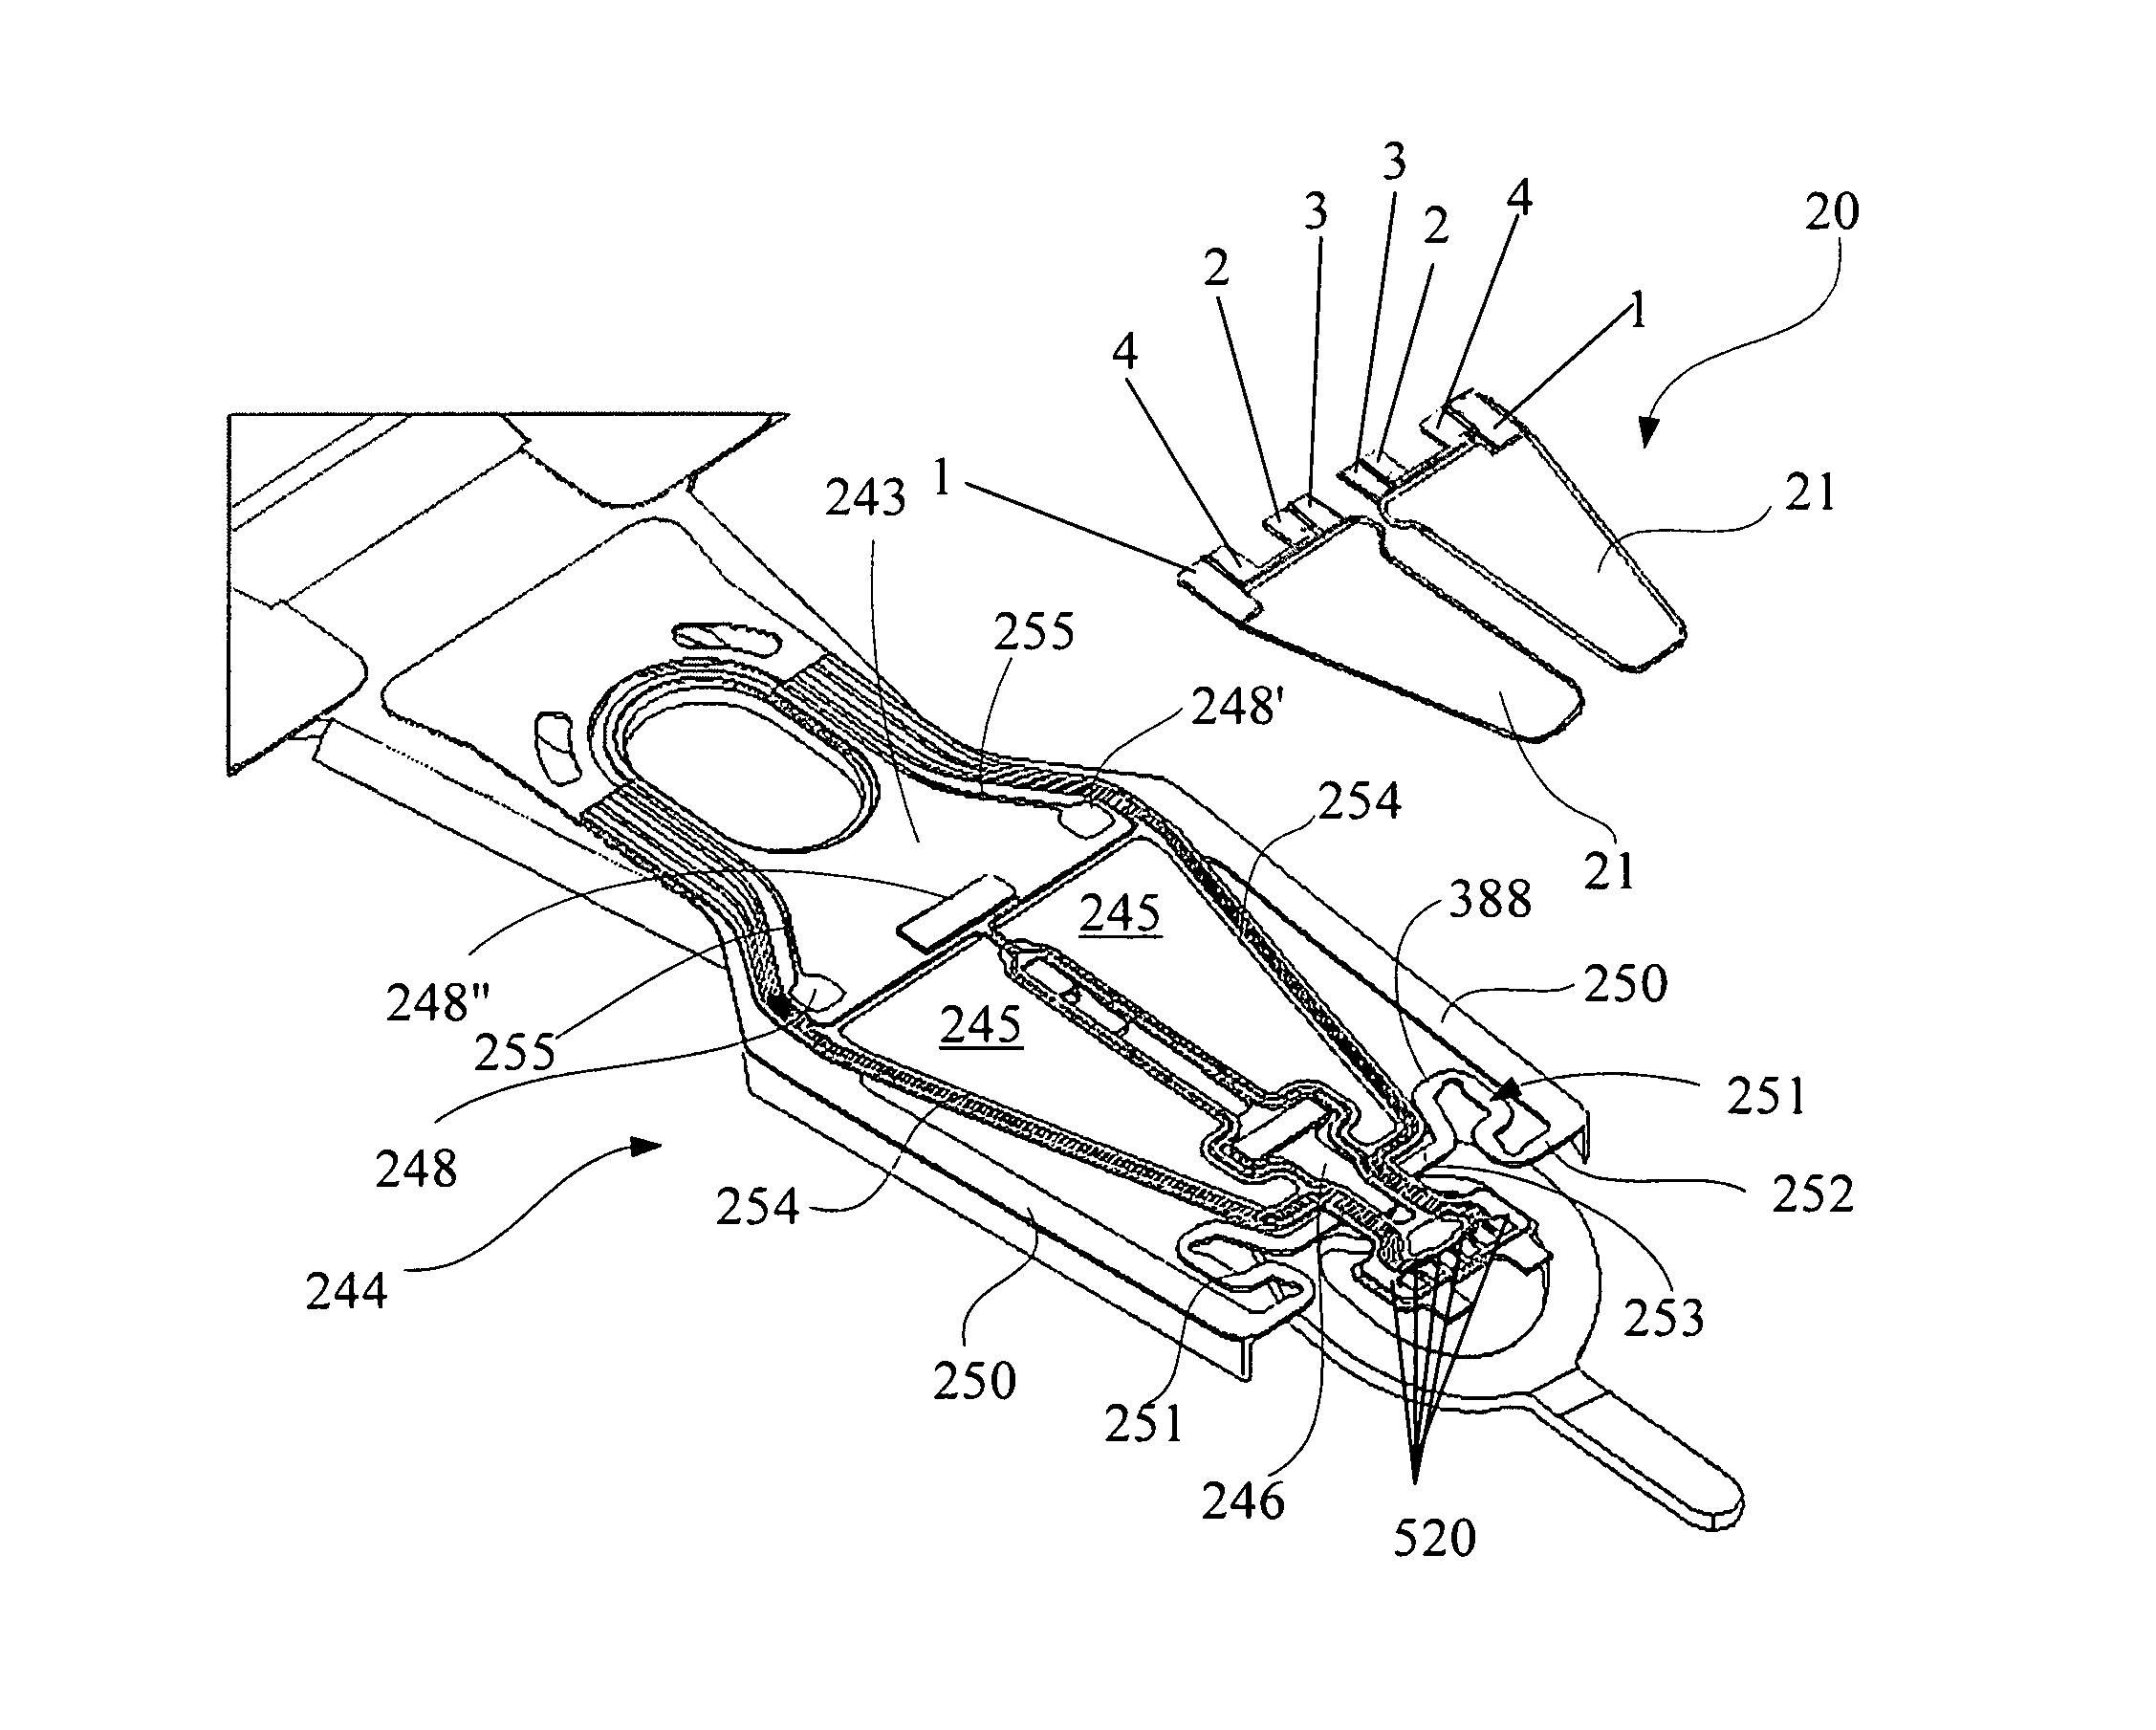 Disk drive head gimbal assembly including a PZT micro-actuator with a pair of separate PZT elements